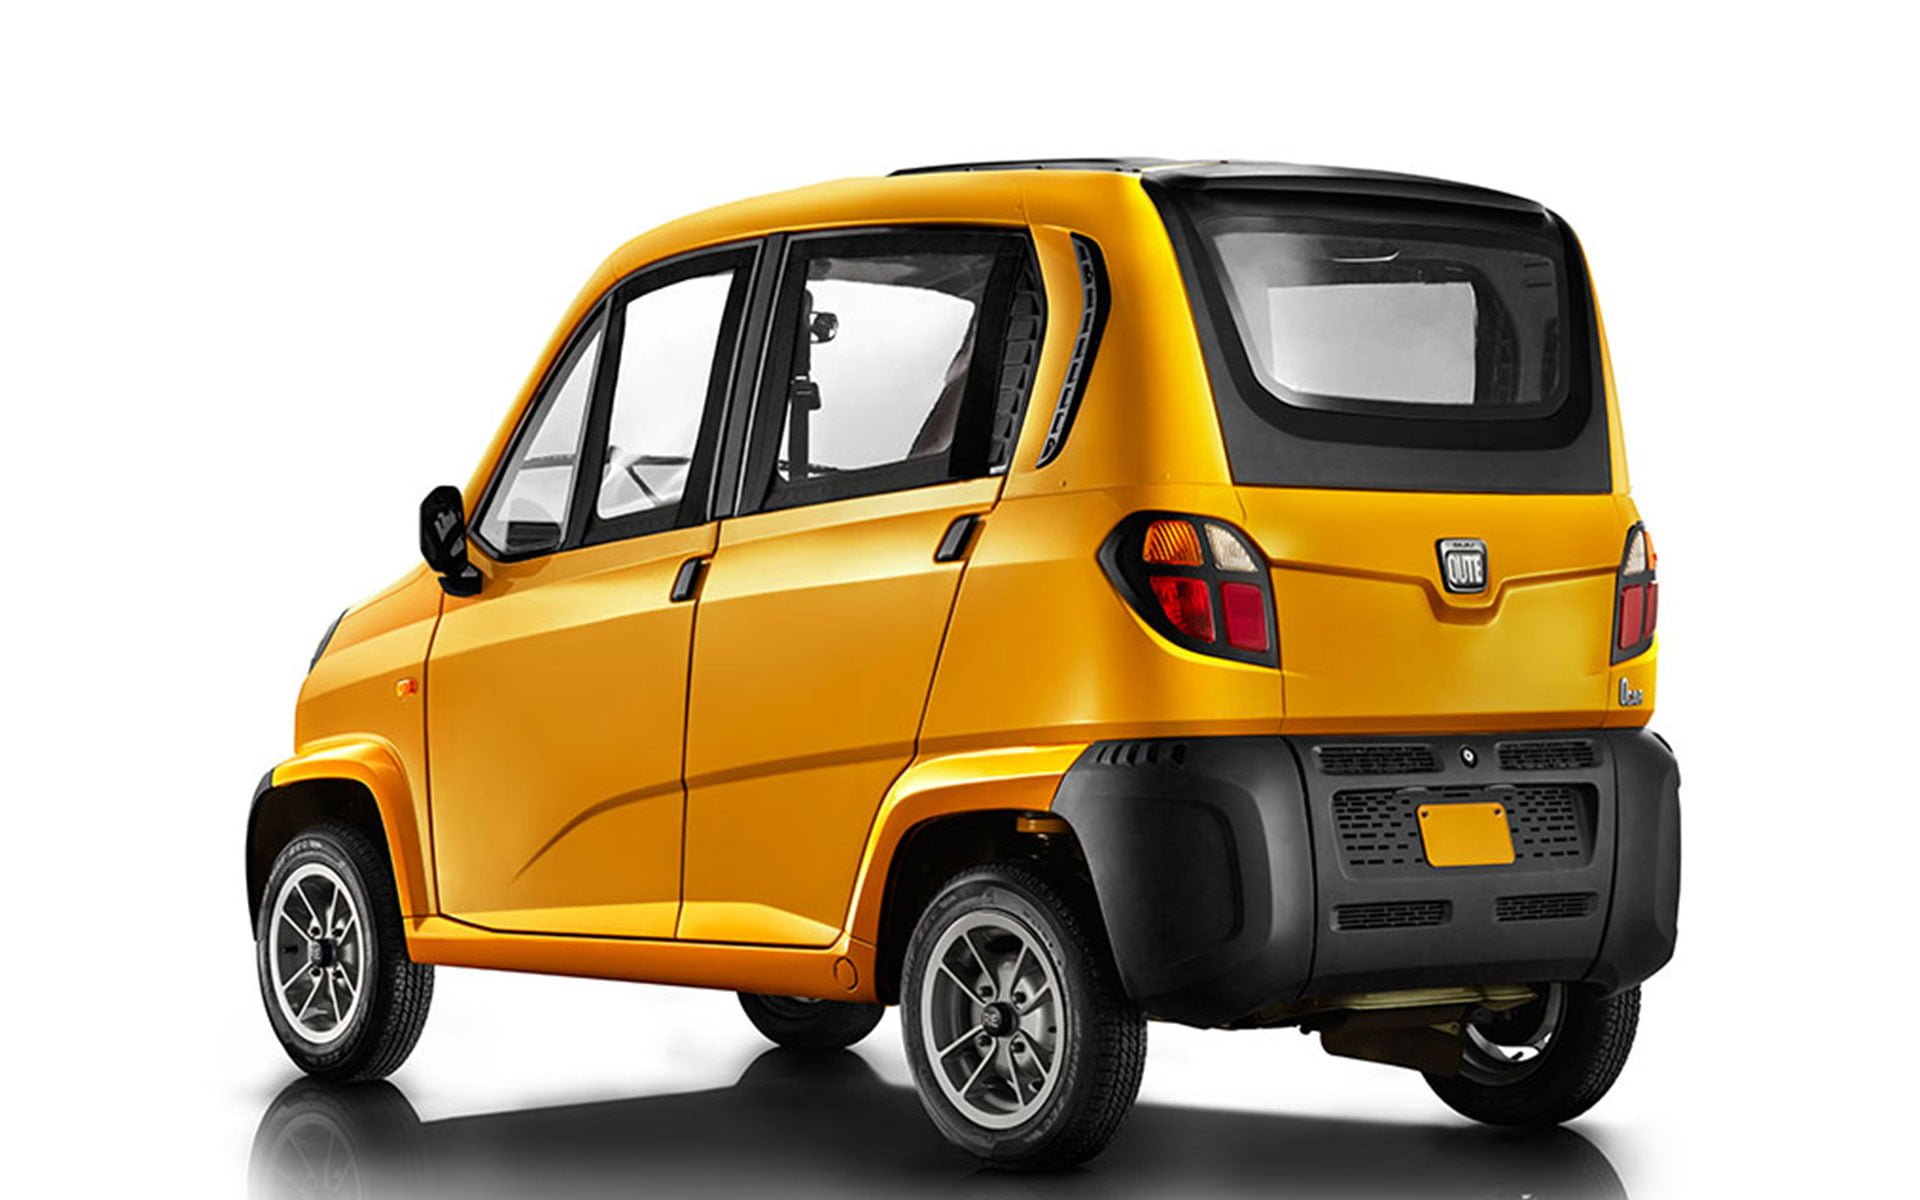 Bajaj Qute Car Price in India, Launch Date, Specifications, Interior Images